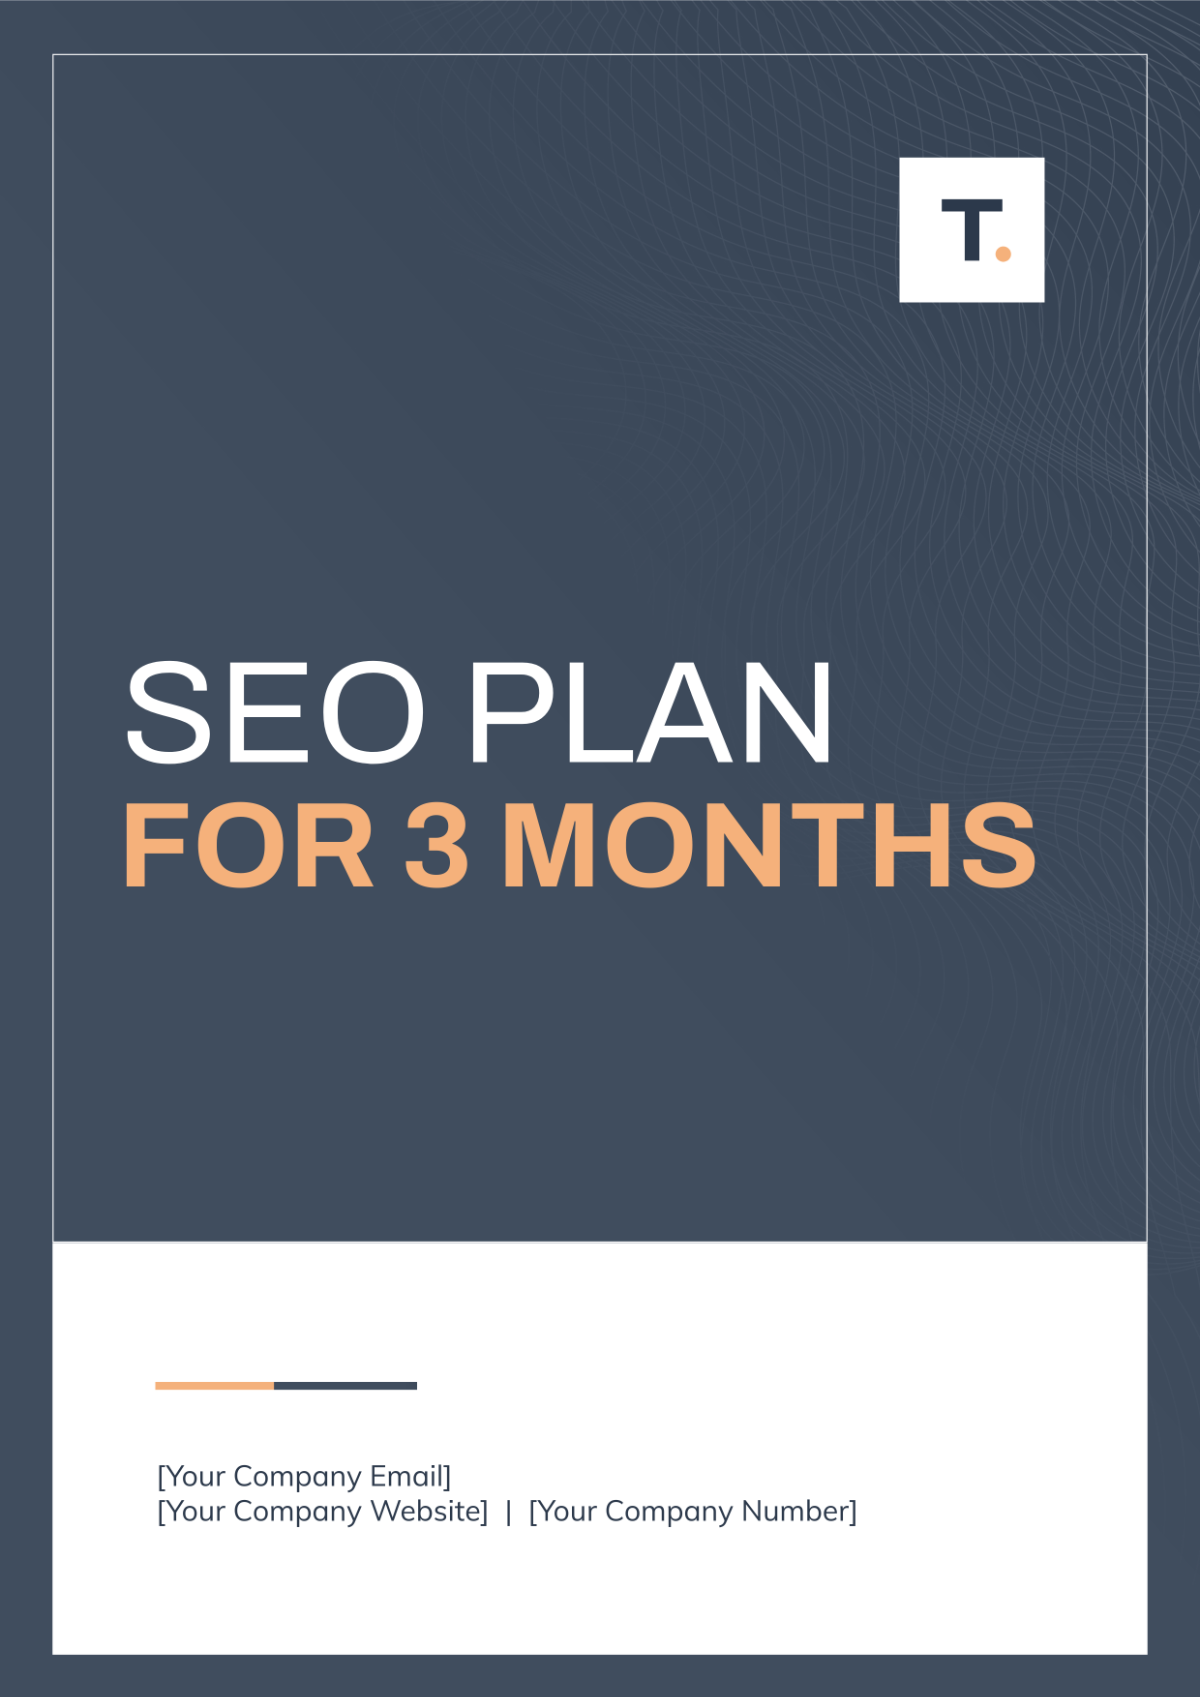 Free SEO Plan for 3 months Template